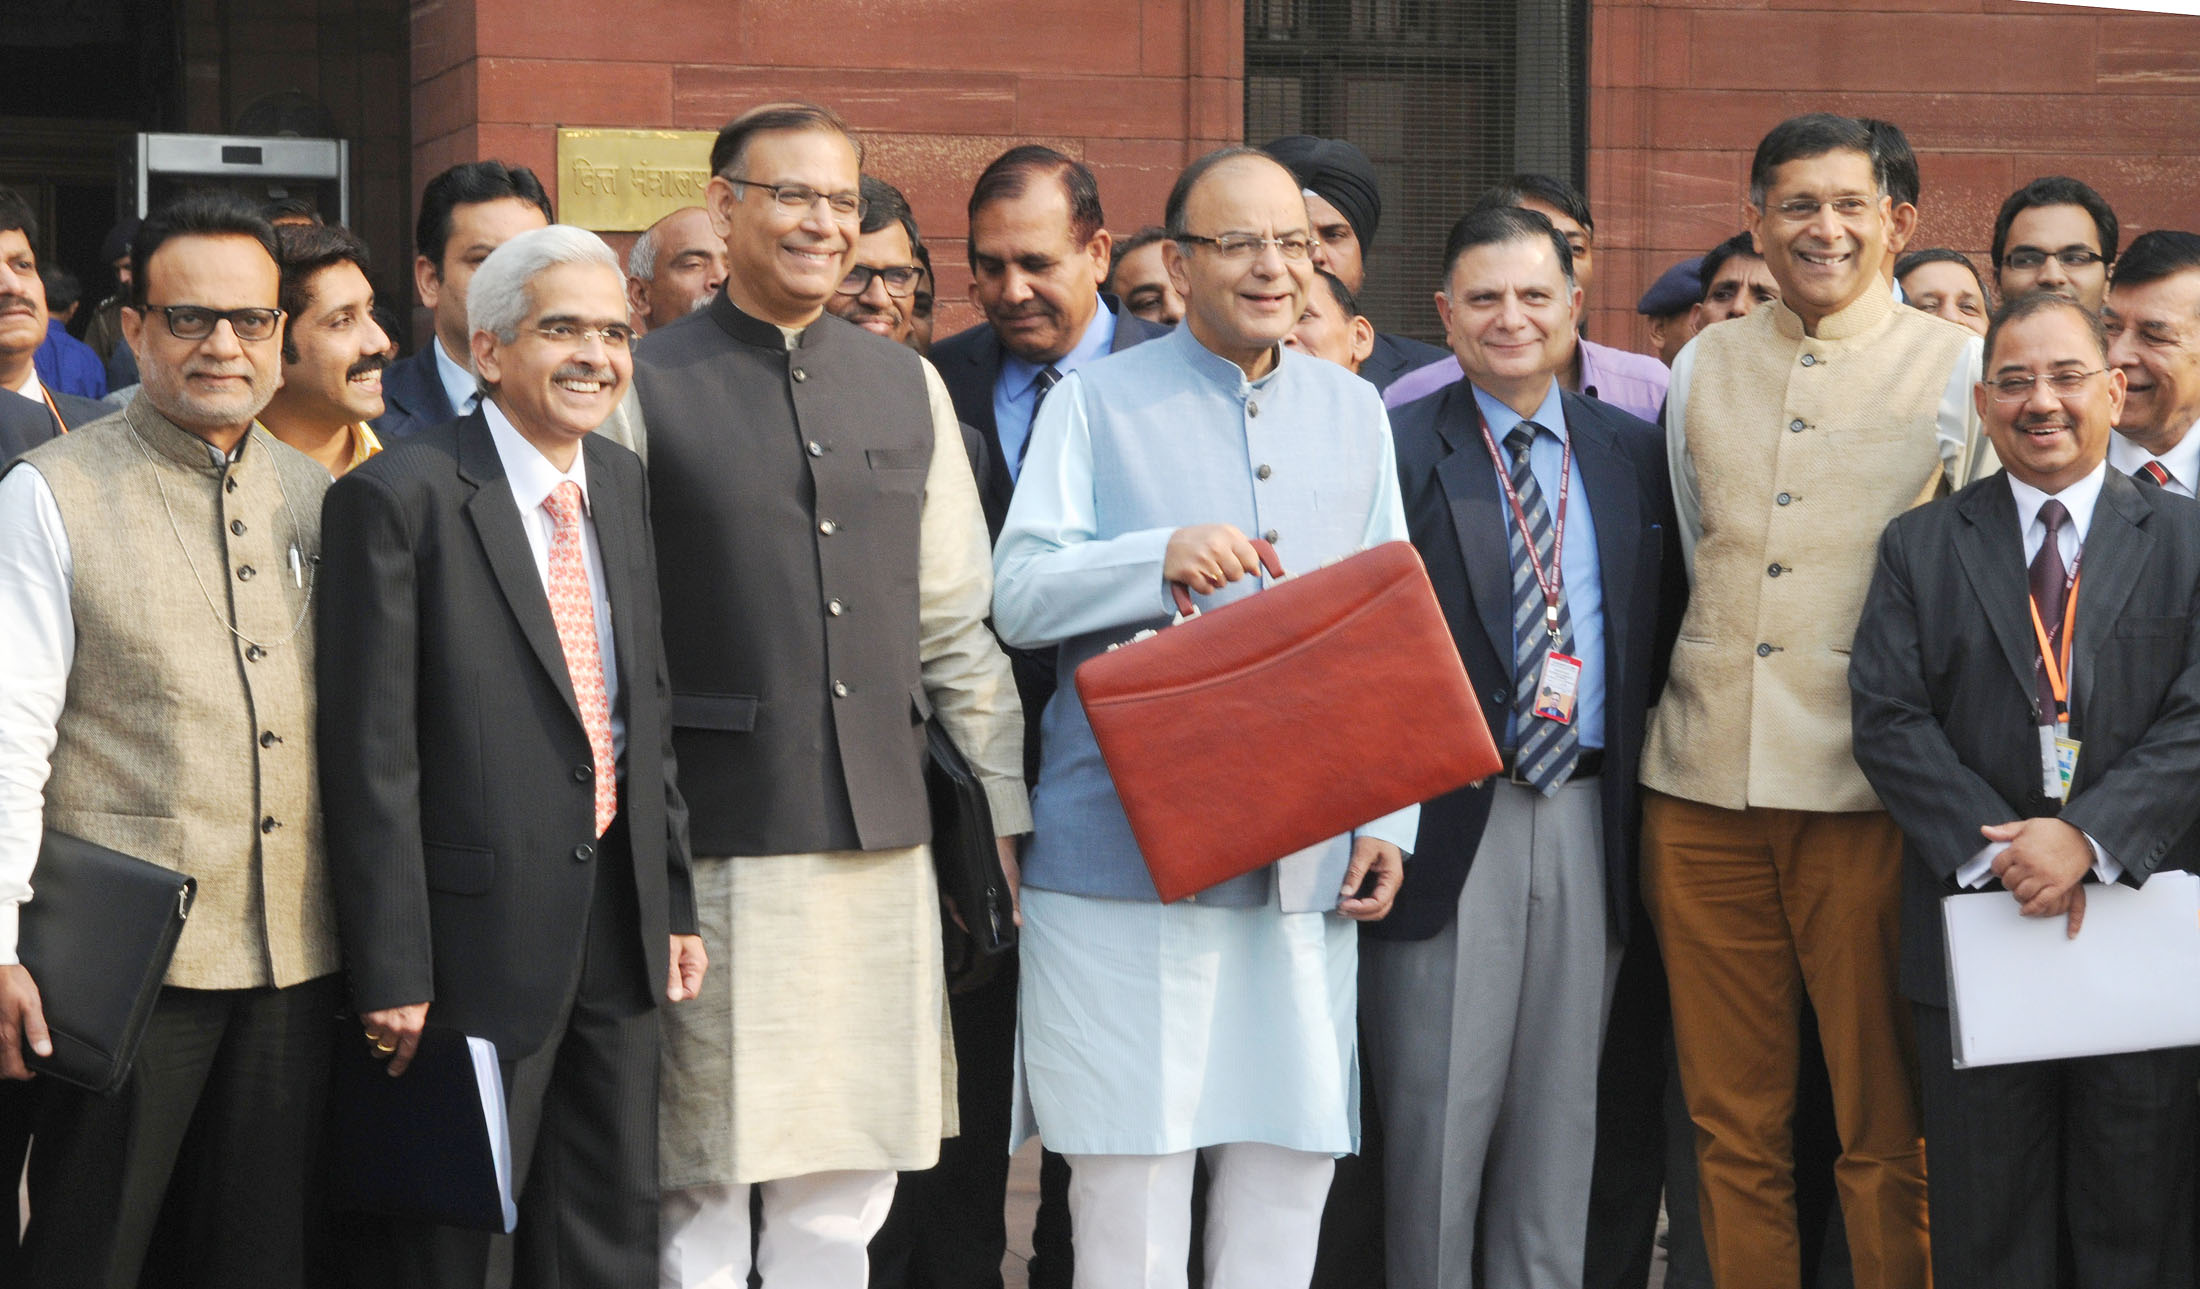 The Union Minister for Finance, Corporate Affairs and Information & Broadcasting, Shri Arun Jaitley departs from North Block to Parliament House along with the Minister of State for Finance, Shri Jayant Sinha to present the General Budget 2016-17, in New Delhi on February 29, 2016. The Secretary, Department of Economic Affairs, Ministry of Finance, Shri Shaktikanta Das, the Secretary, Revenue, Dr. Hasmukh Adhia and the Chief Economic Adviser, Dr. Arvind Subramanian are also seen.